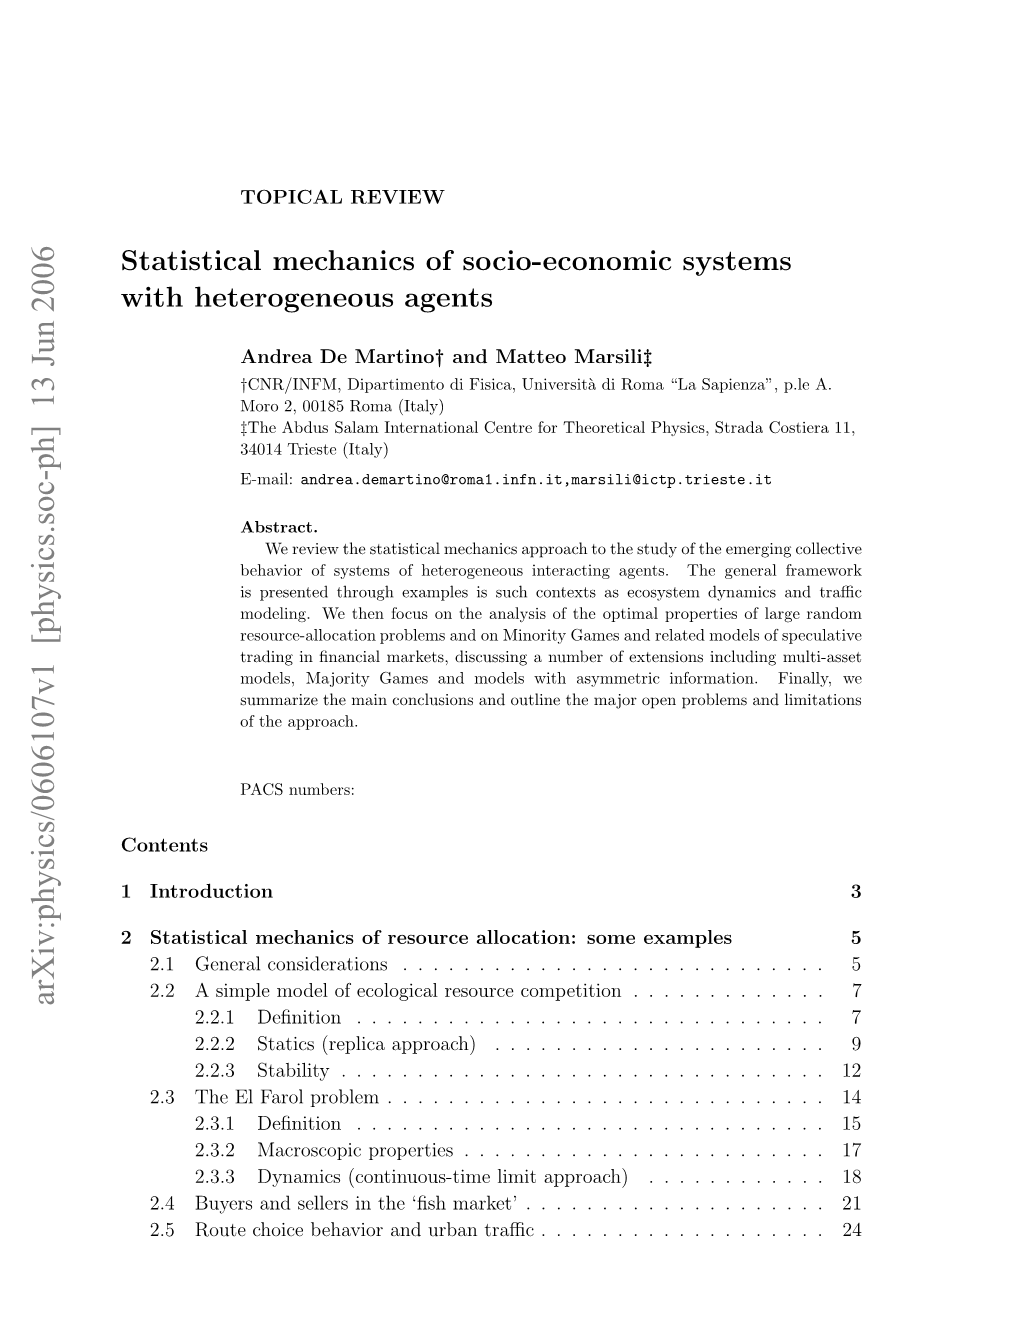 Statistical Mechanics of Socio-Economic Systems With